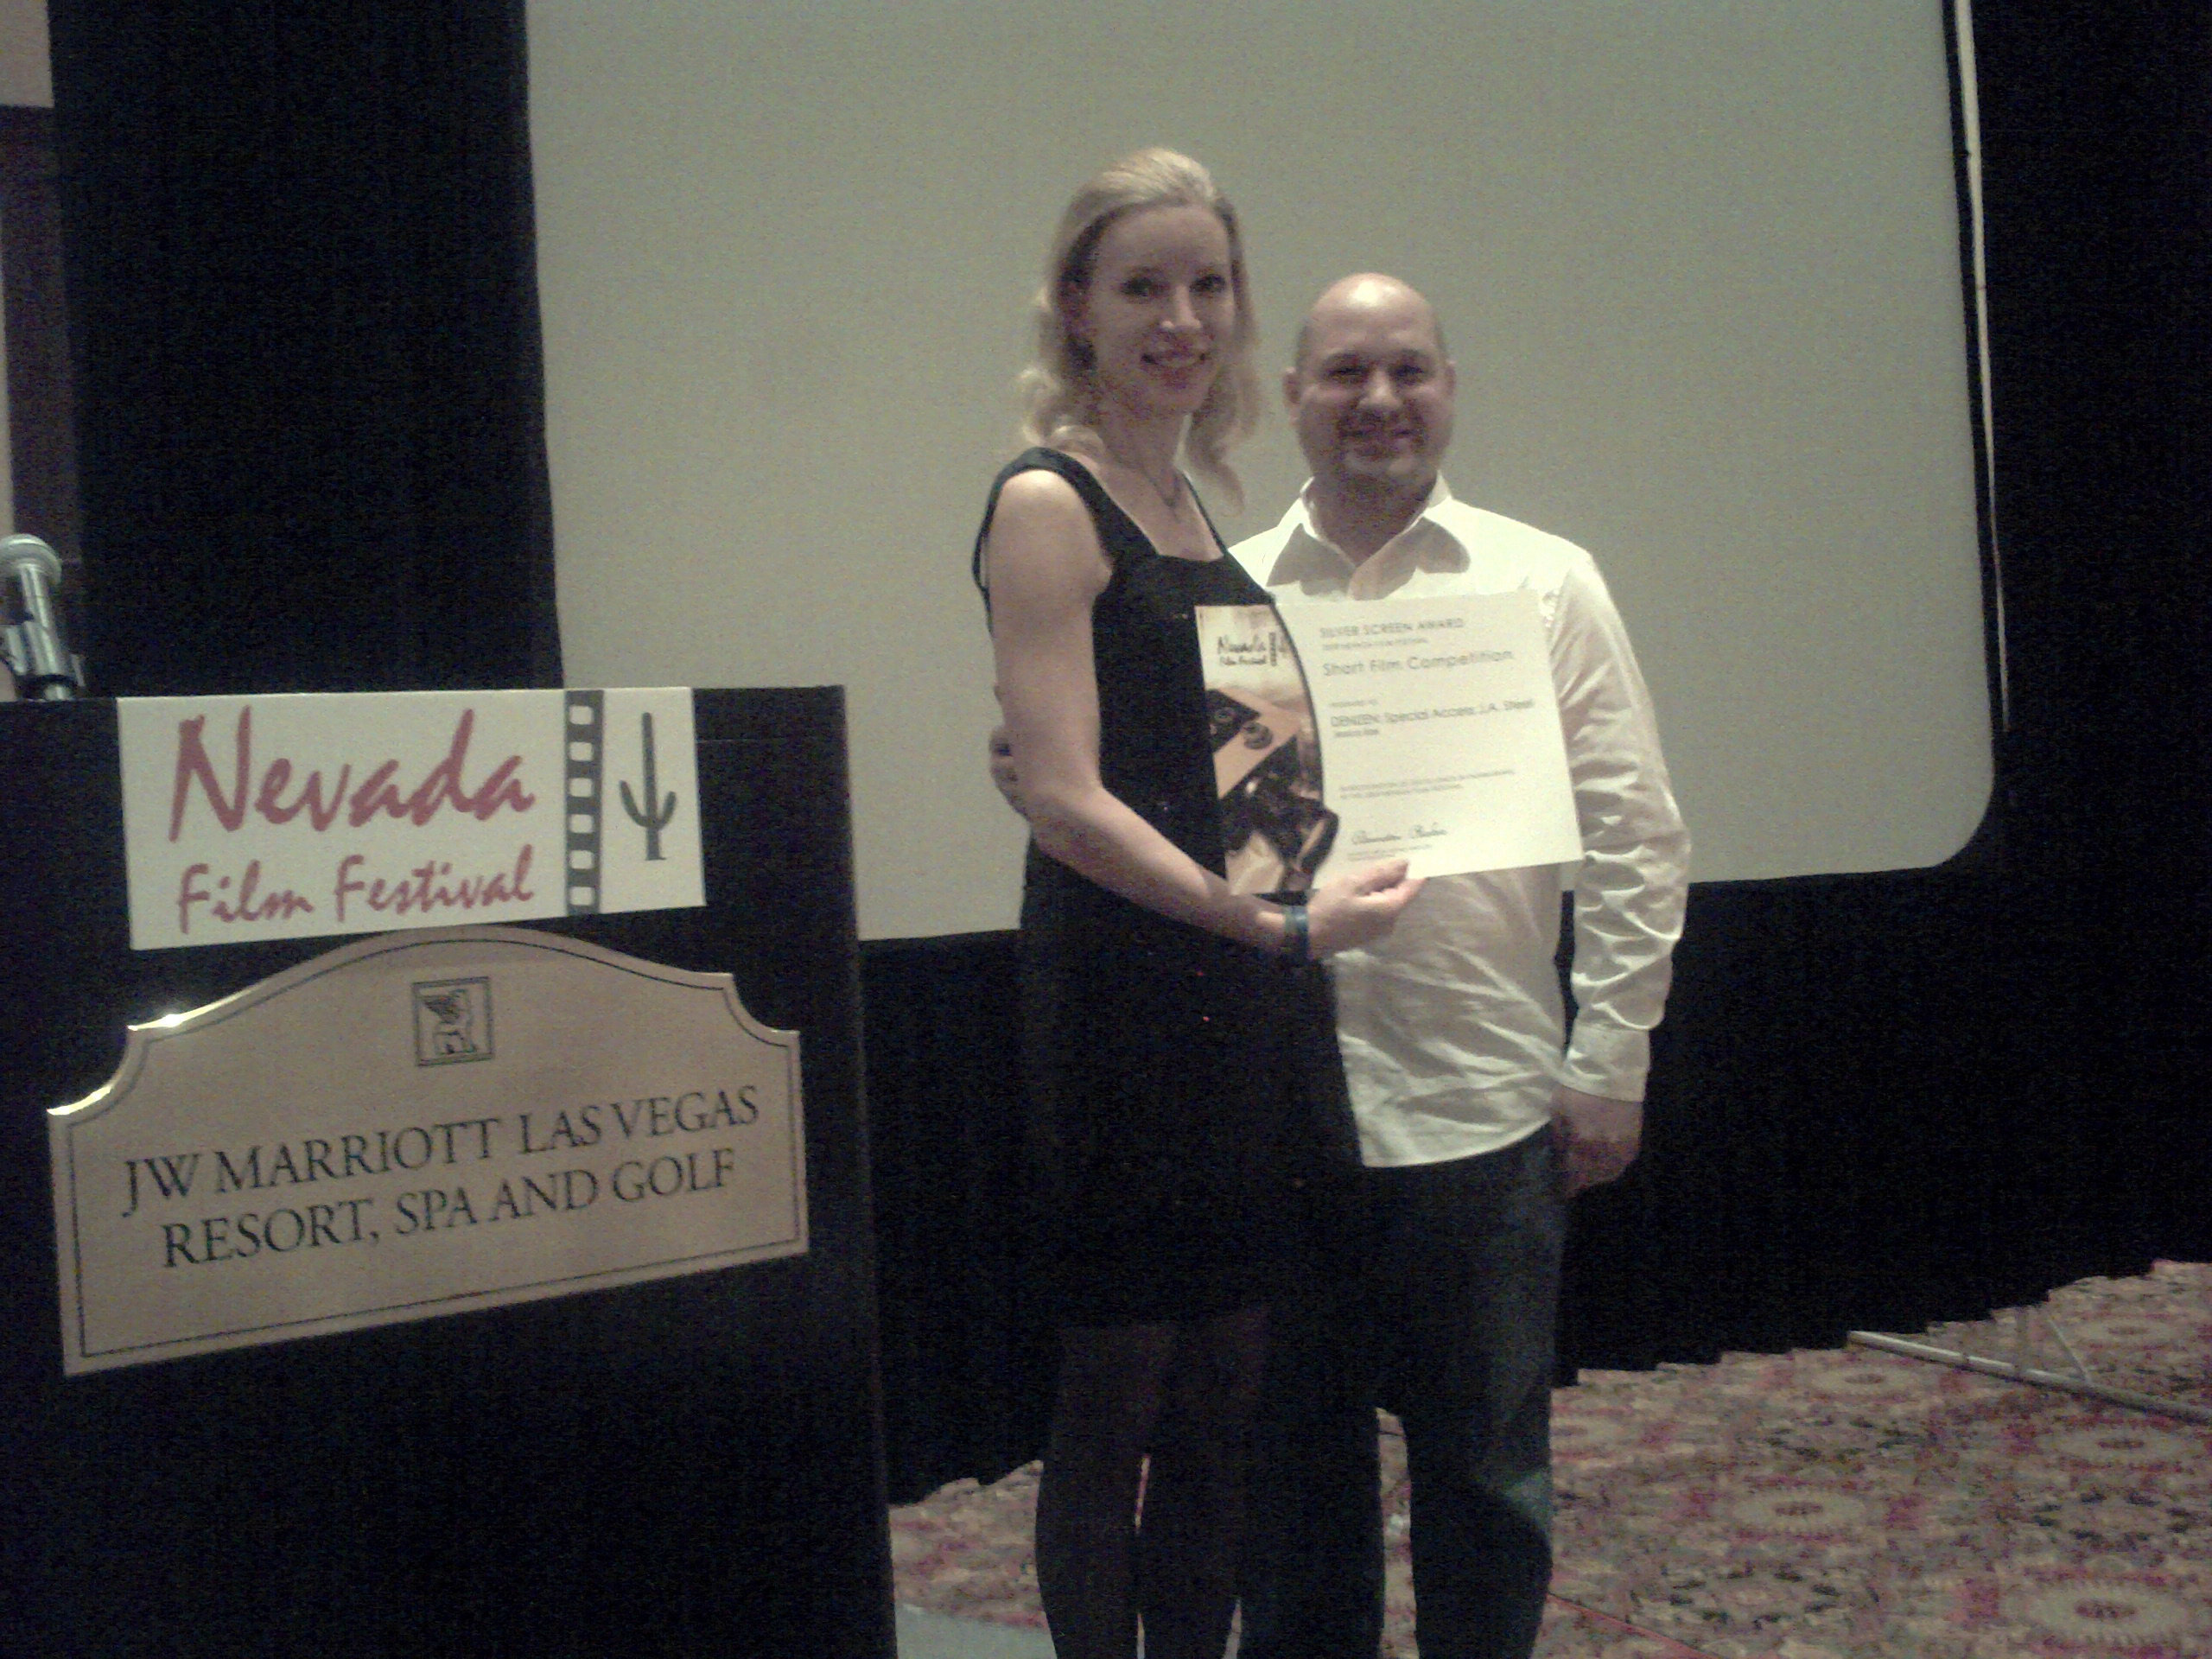 Jessica Bair with her Silver Screen Award at the Nevada Film Festival.